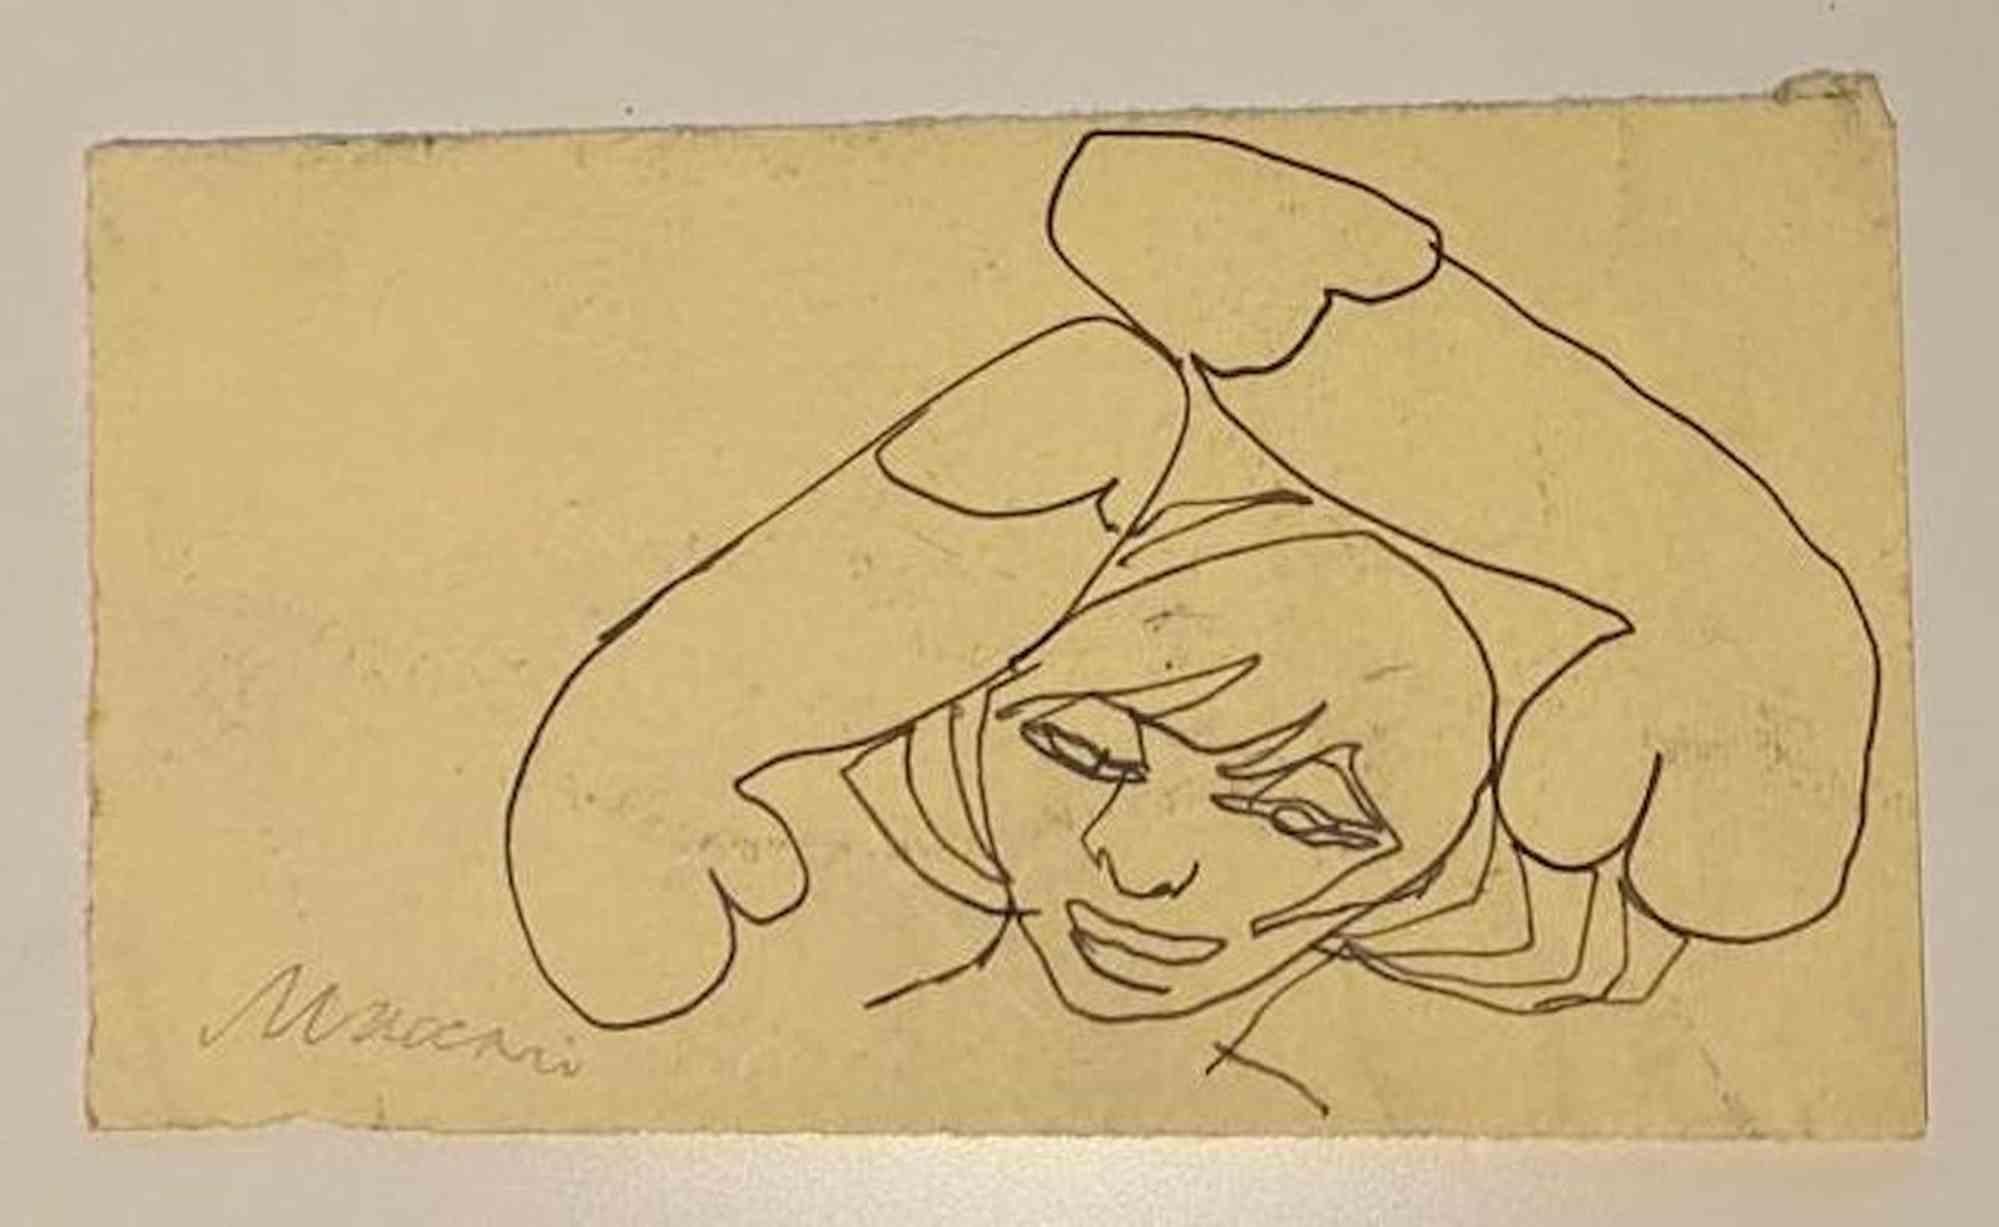 Strange Thoughts is a pen Drawing realized by Mino Maccari  (1924-1989) in the Mid-20th Century.

Hand-signed on the lower.

Good conditions.

Mino Maccari (Siena, 1924-Rome, June 16, 1989) was an Italian writer, painter, engraver and journalist,